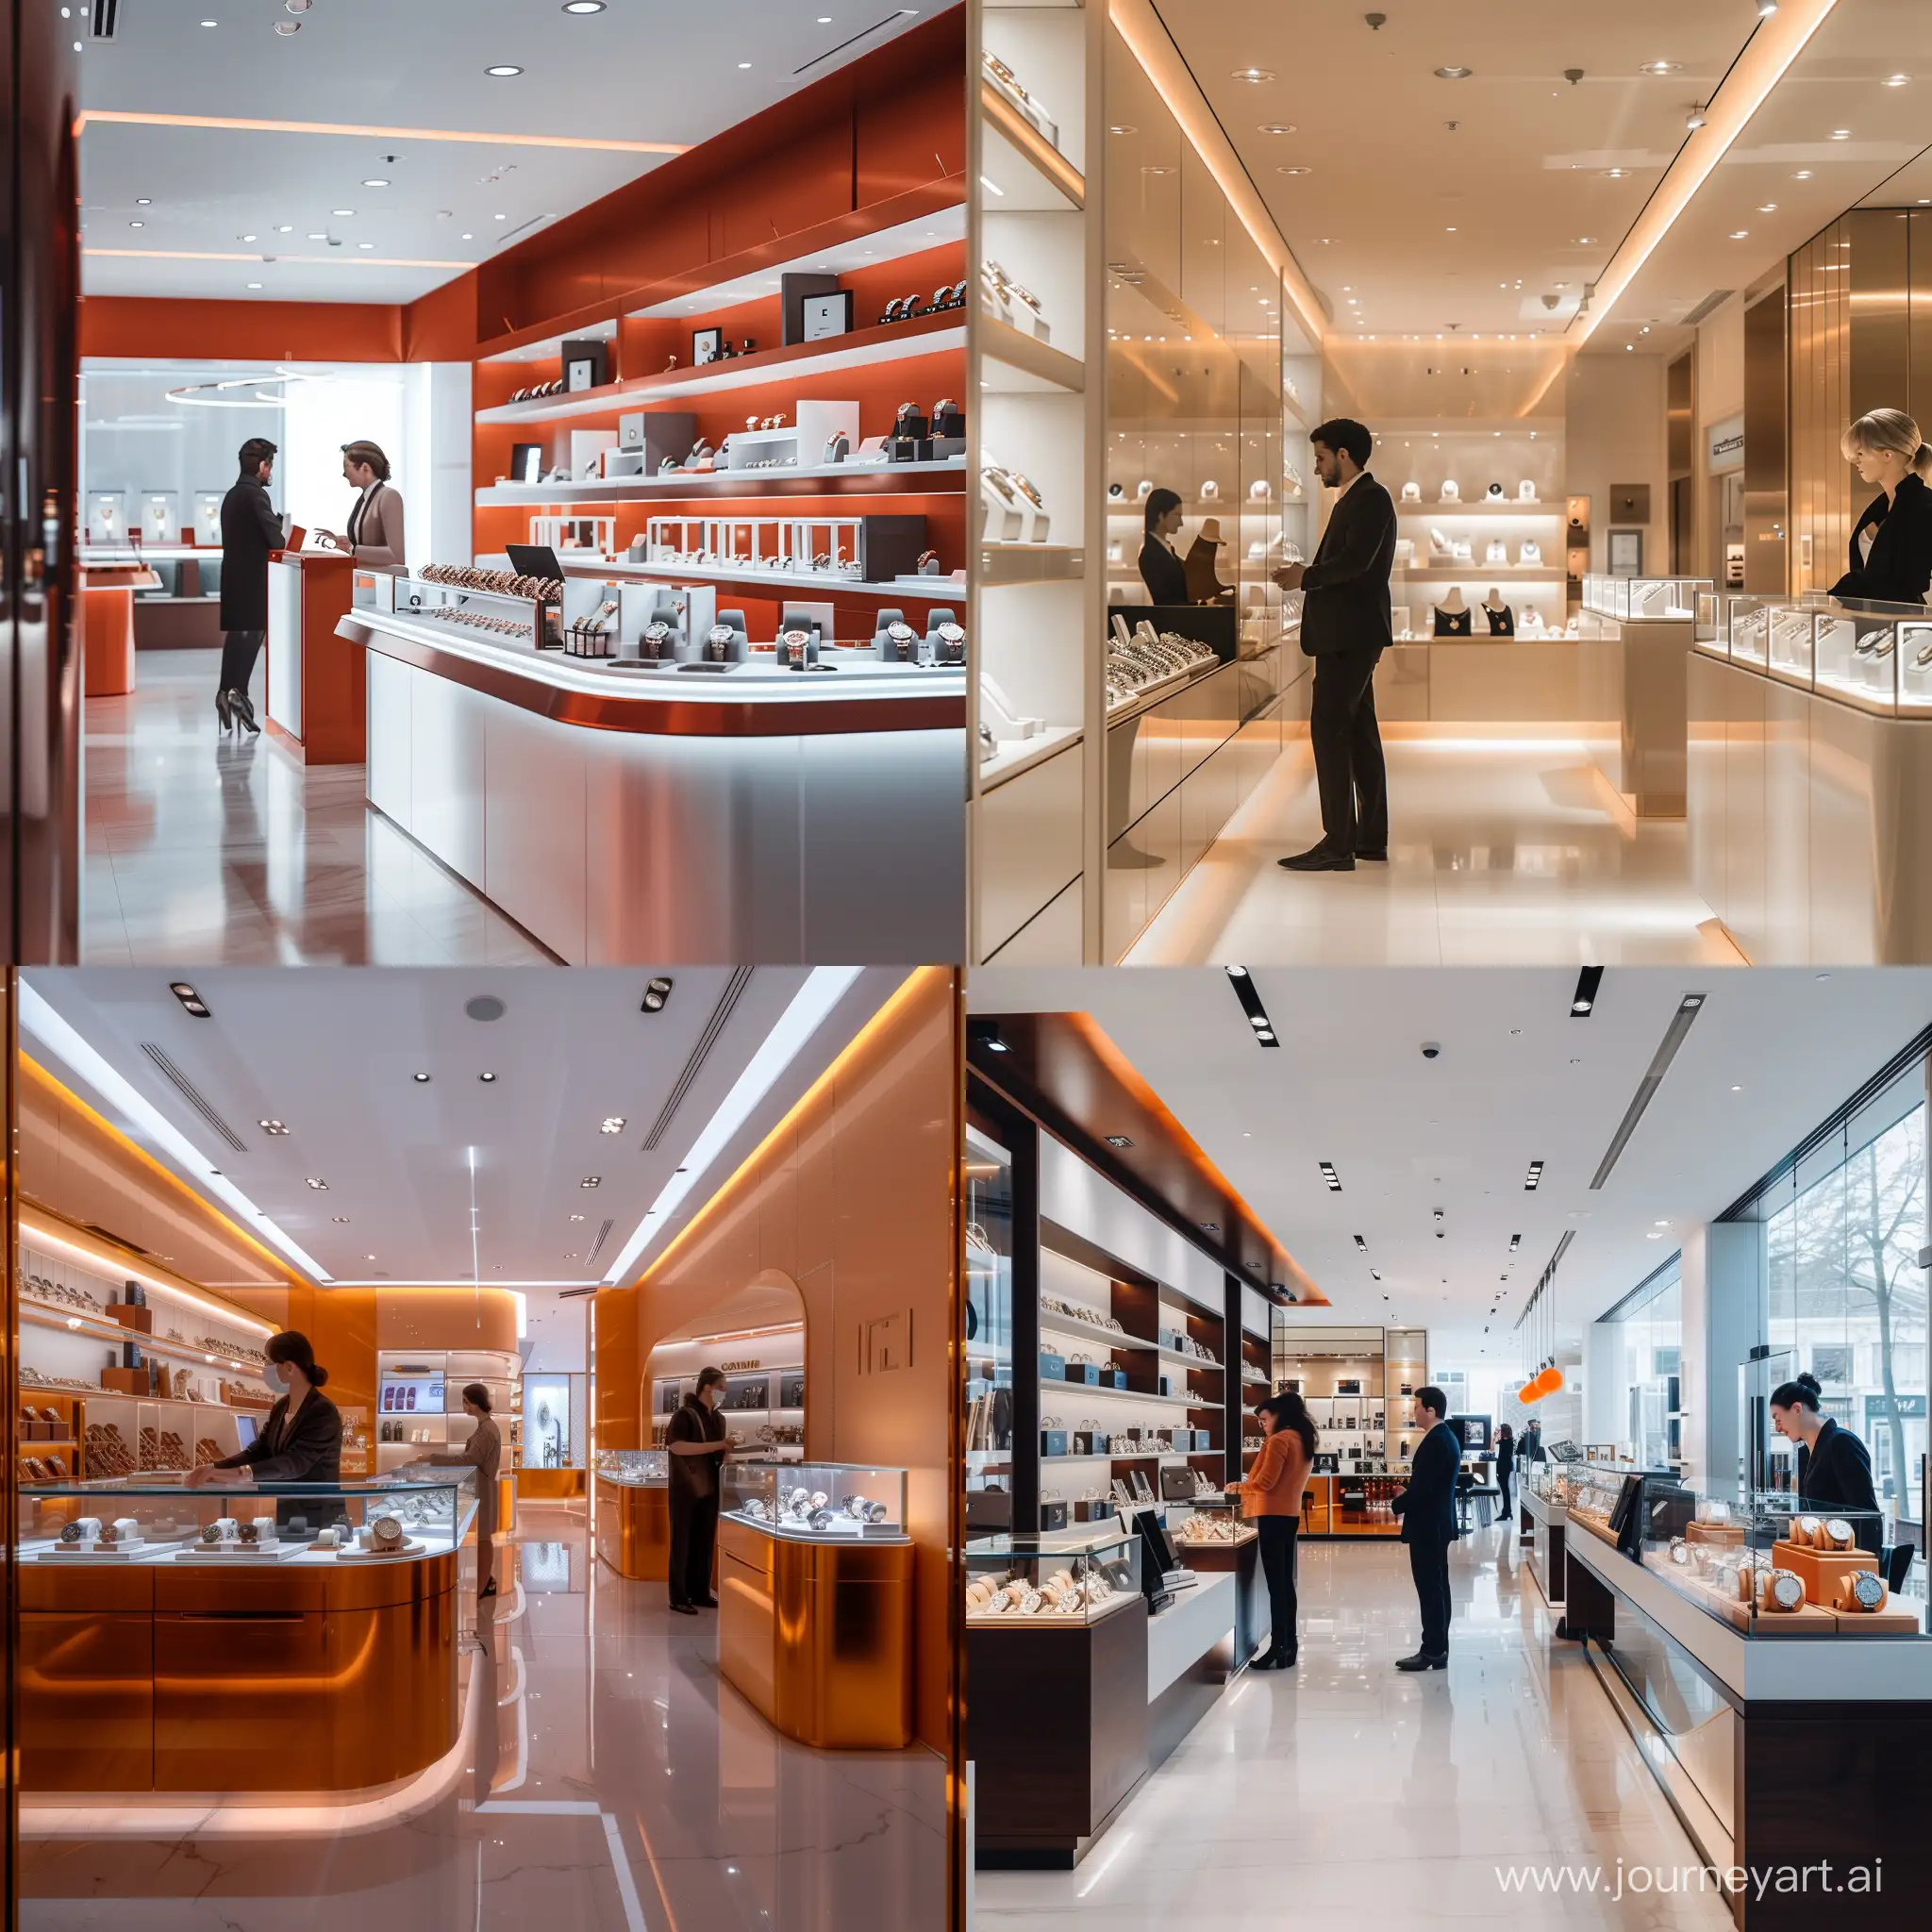 User a photorealistic image depicting the interior of a bright, modern jeweler, designed to resemble a photograph taken with specific camera settings. The scene includes luxurious watches and jewelry on shelves and counters, a customer, and a salesperson, all set in a sophisticated and modern Swiss luxury retail environment. Nikon D810 | ISO 64 | focal length 20mm (Voigtländer 20mm f3.5) | Aperture f/9 | Exposure Time 1/40 Sec (DRI)